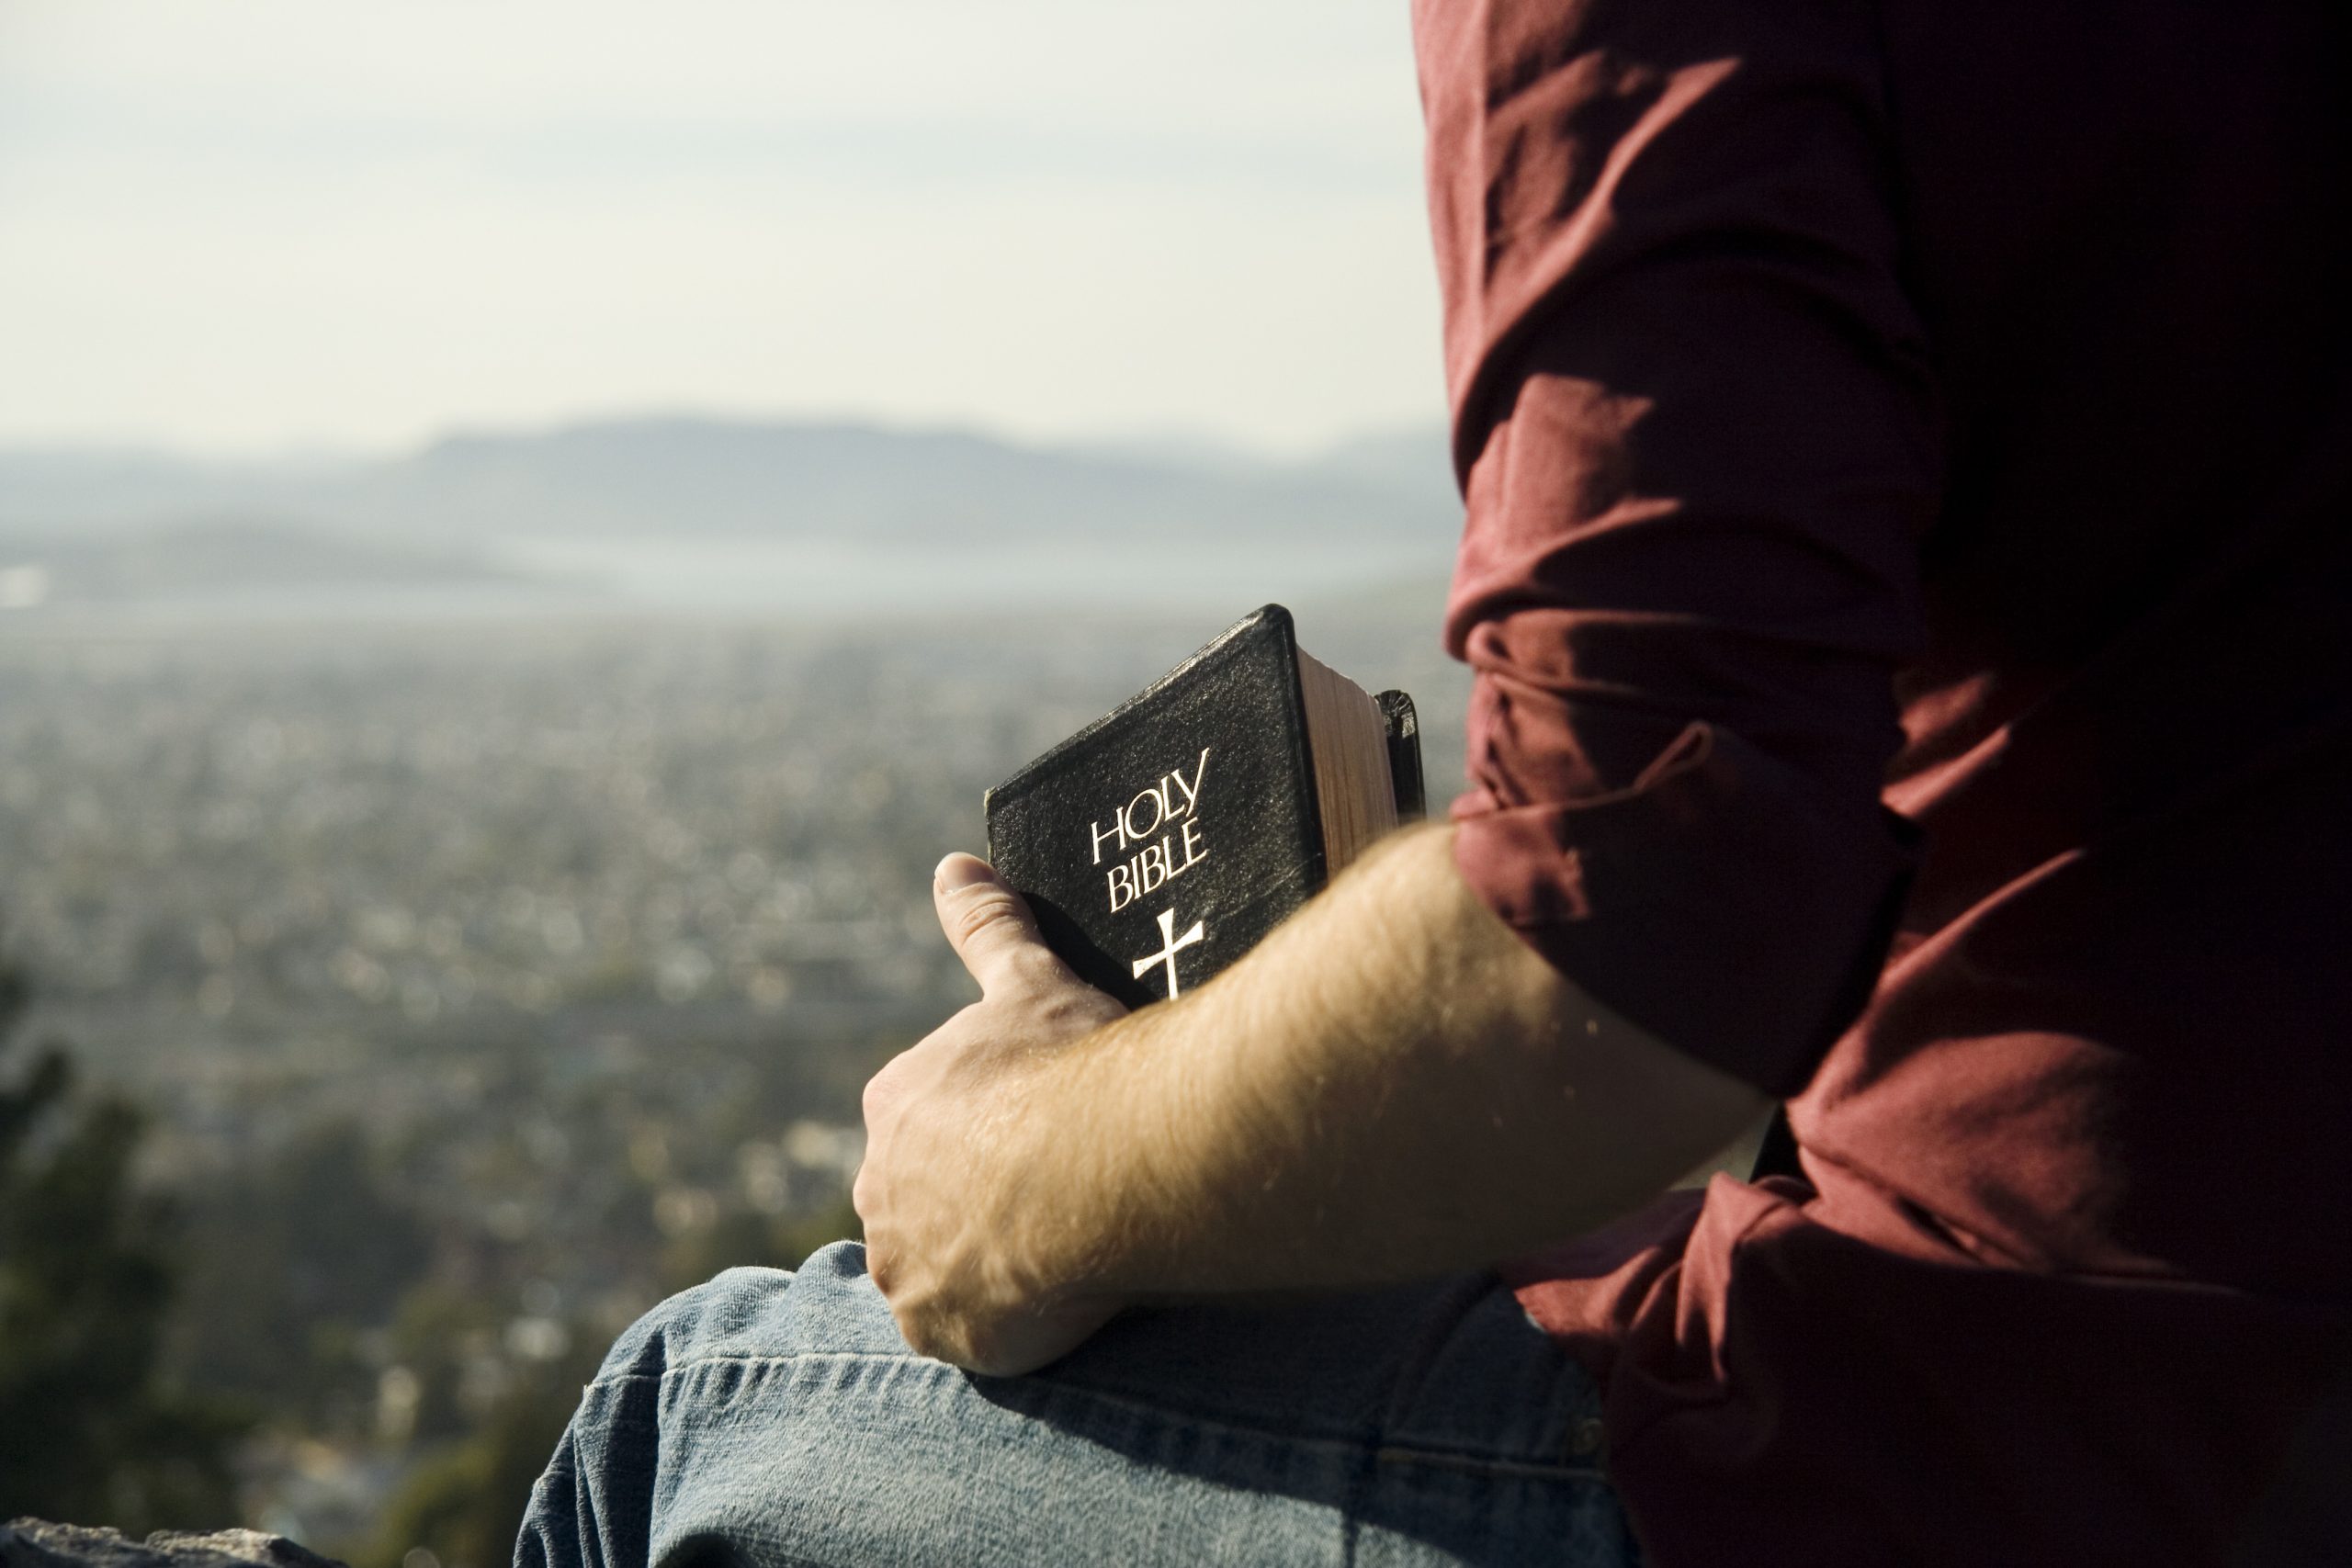 Bible and a view